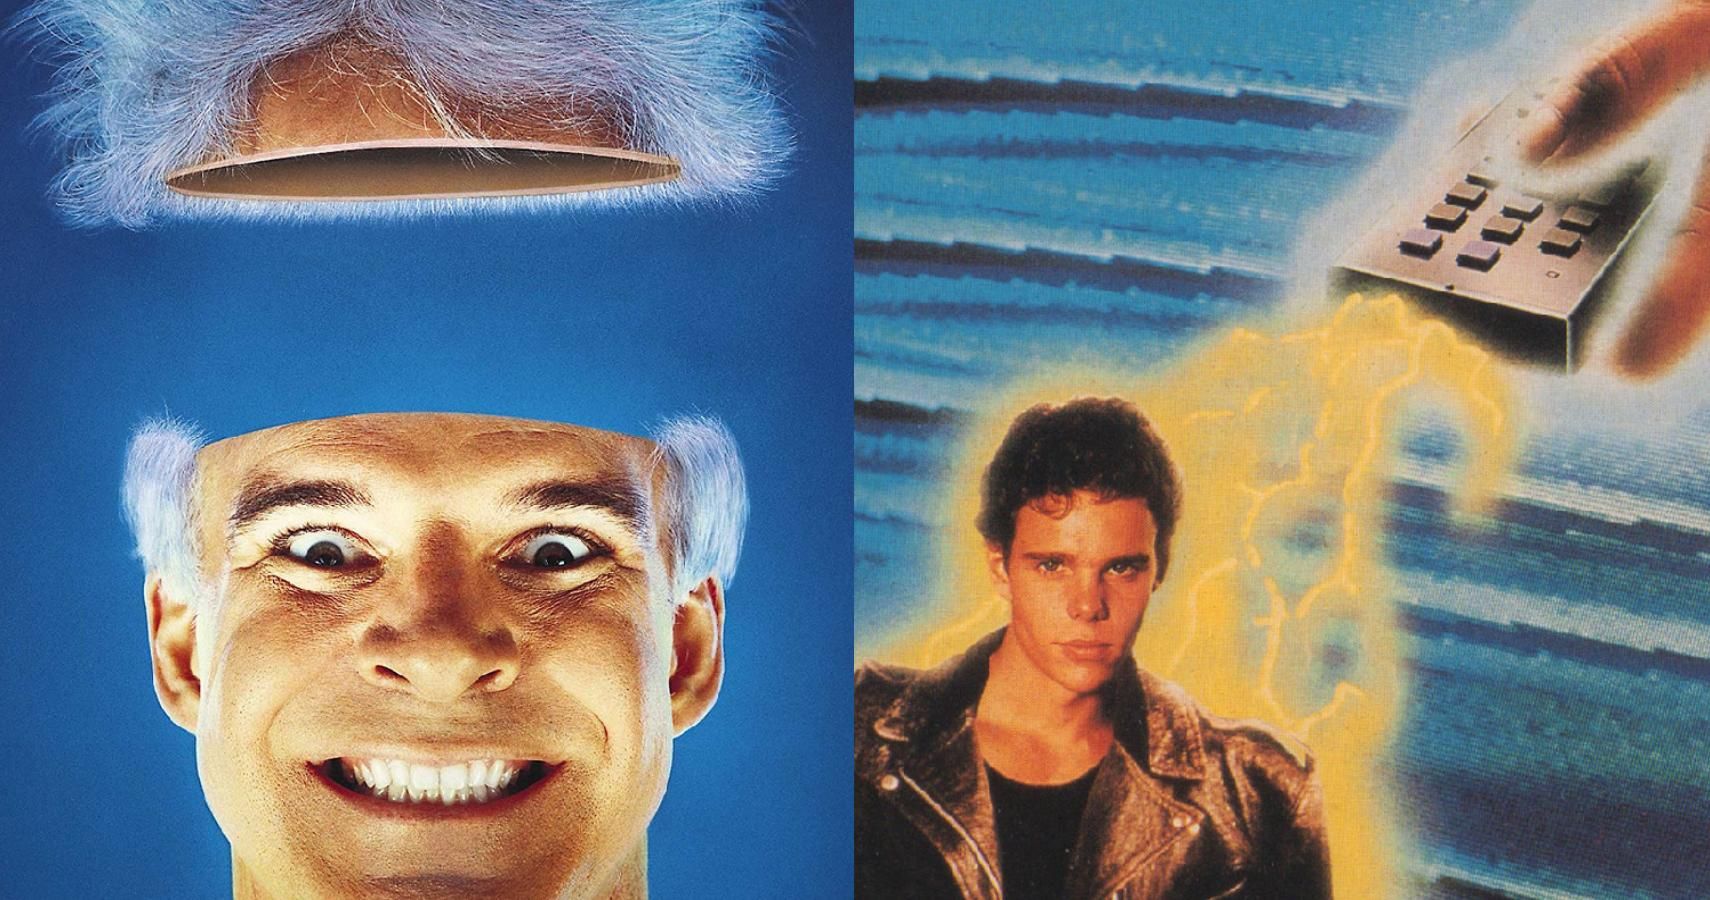 10 Insane VHS Covers From 1980s Science Fiction Movies